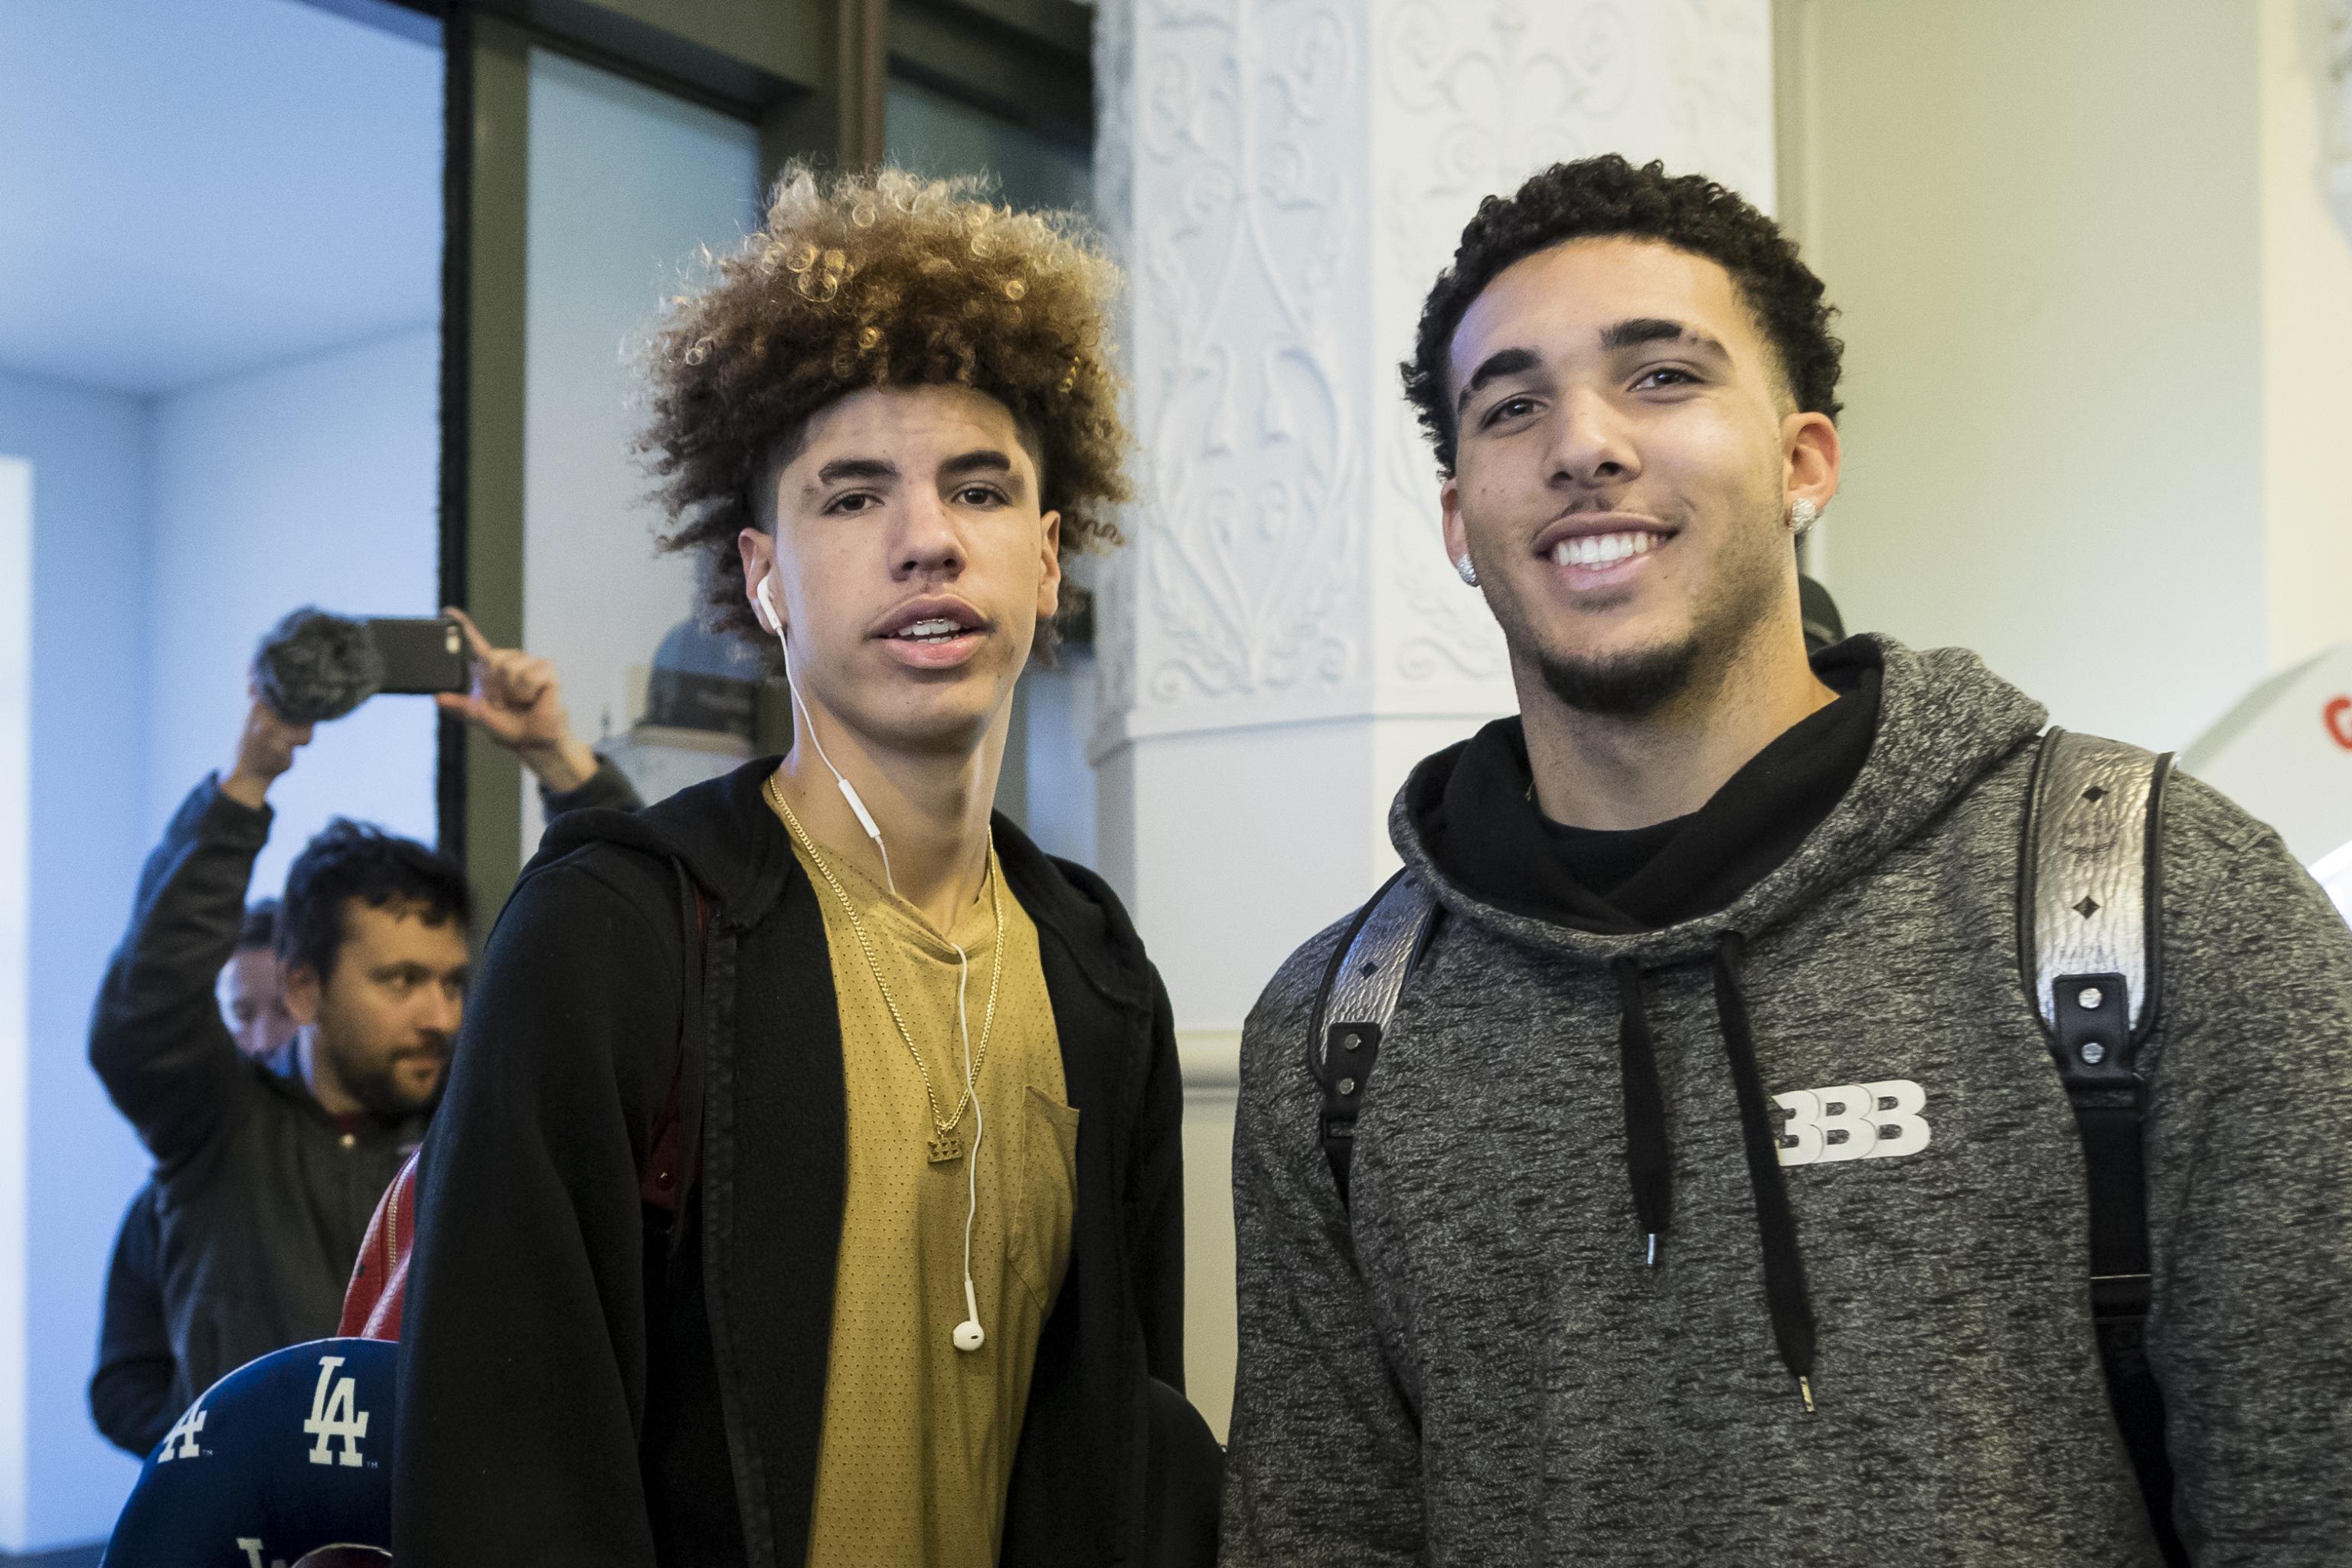 LaMelo and LiAngelo Ball's Lithuania jerseys are on sale at